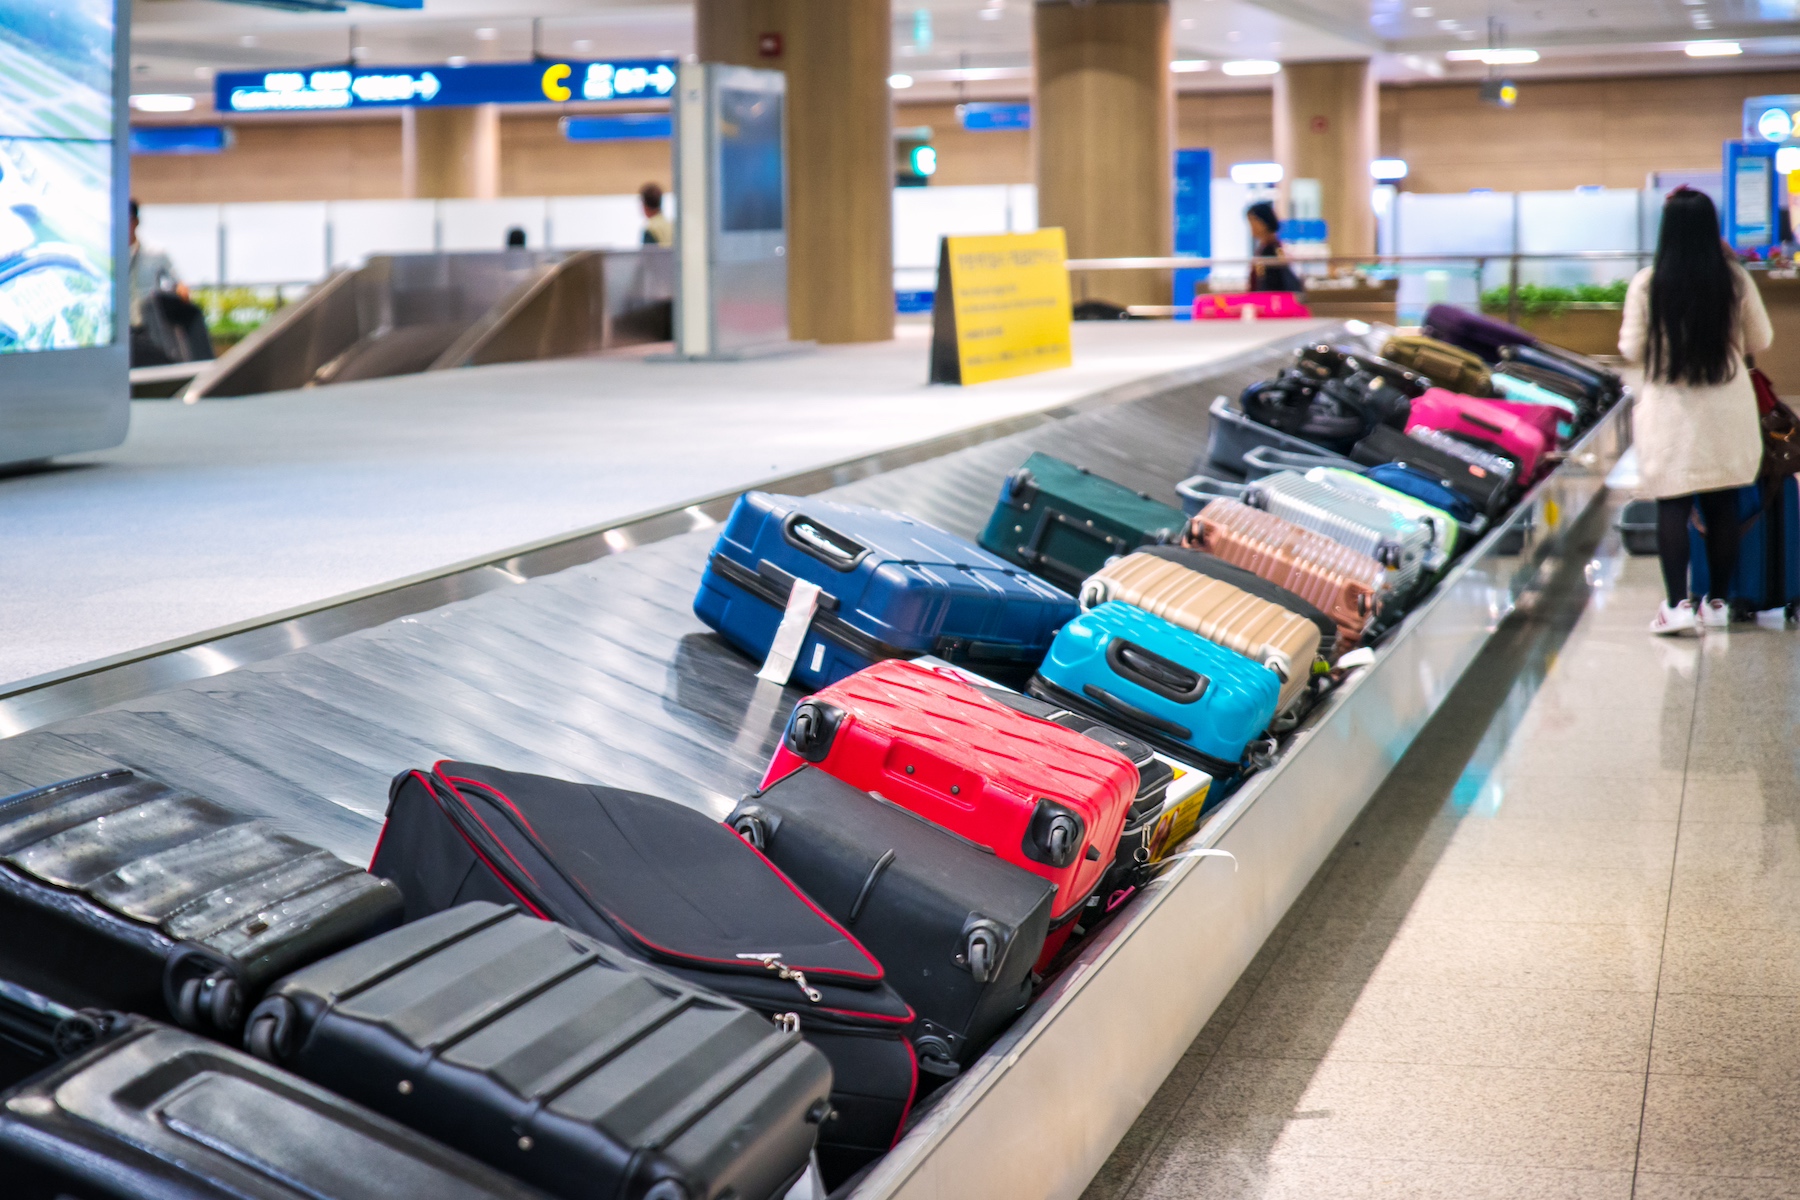 Many travel bags sit on a baggage claim belt at the airport